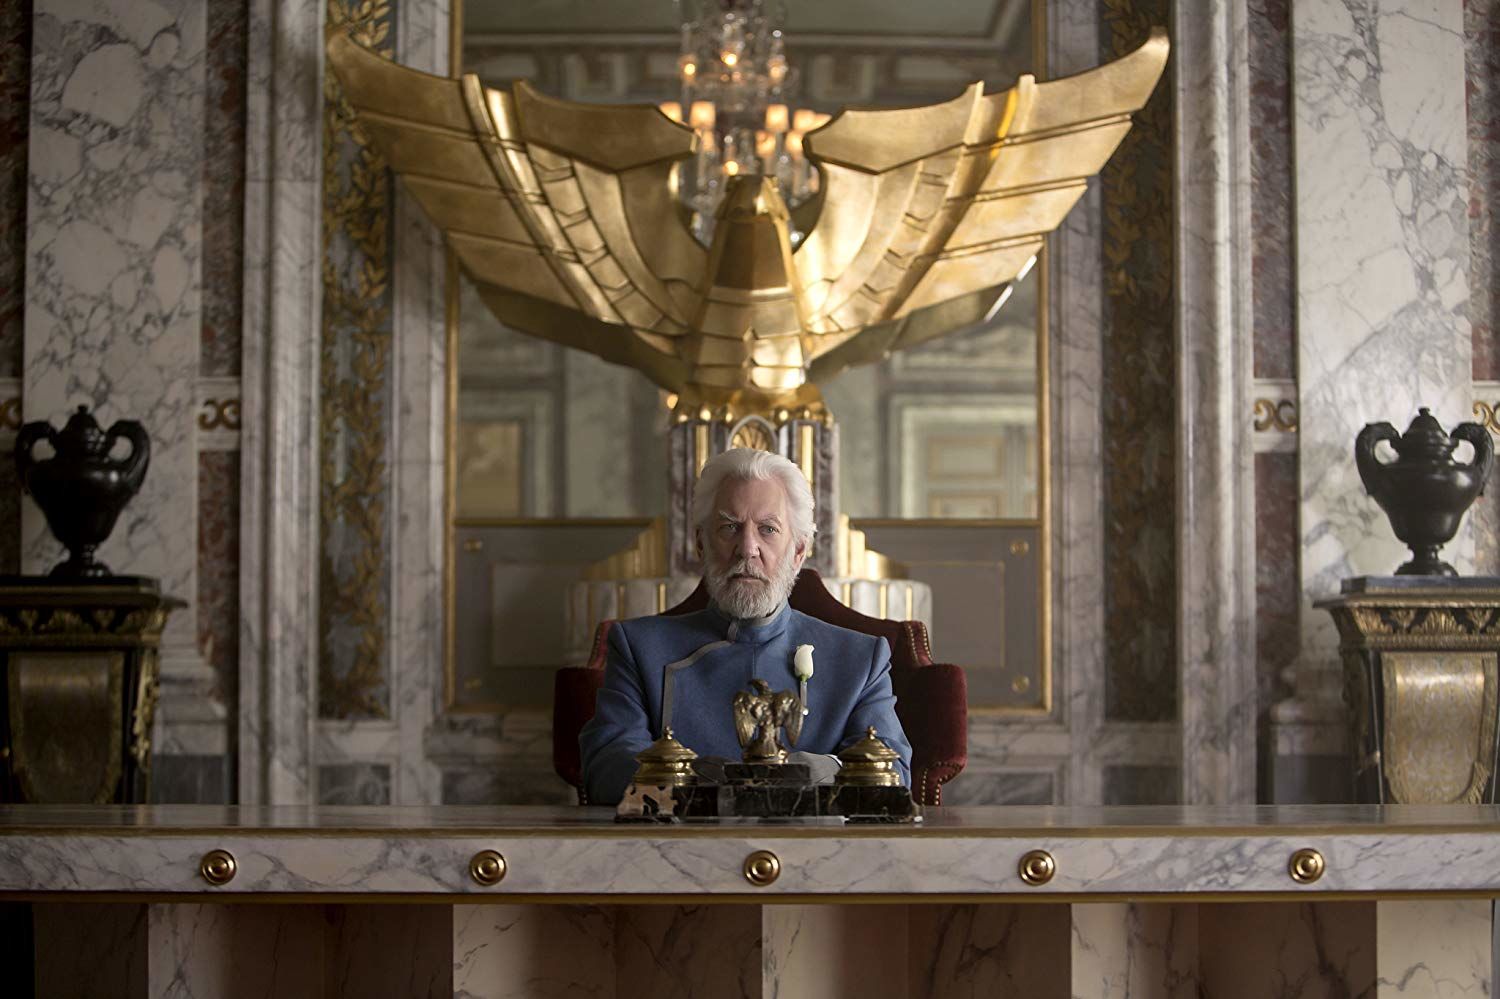 The Hunger Games: Mockingjay Part 1 Streaming: Watch & Stream Online via  Peacock